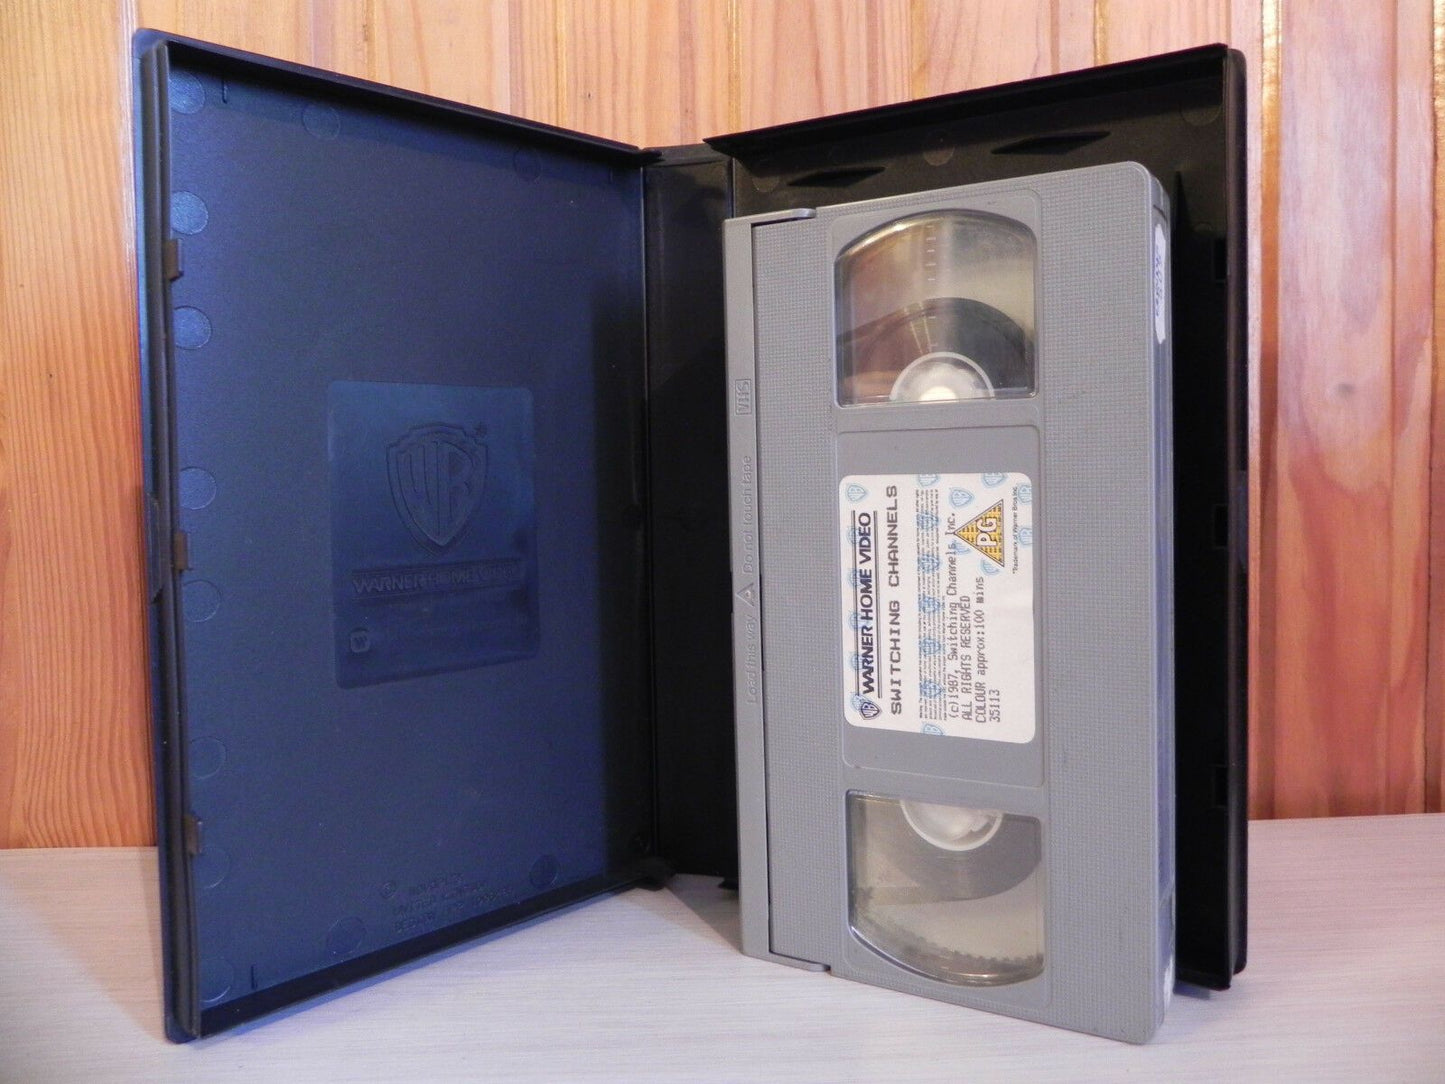 Switching Channels - Christopher Reeve - Original Superman - Ex-Rental - VHS-